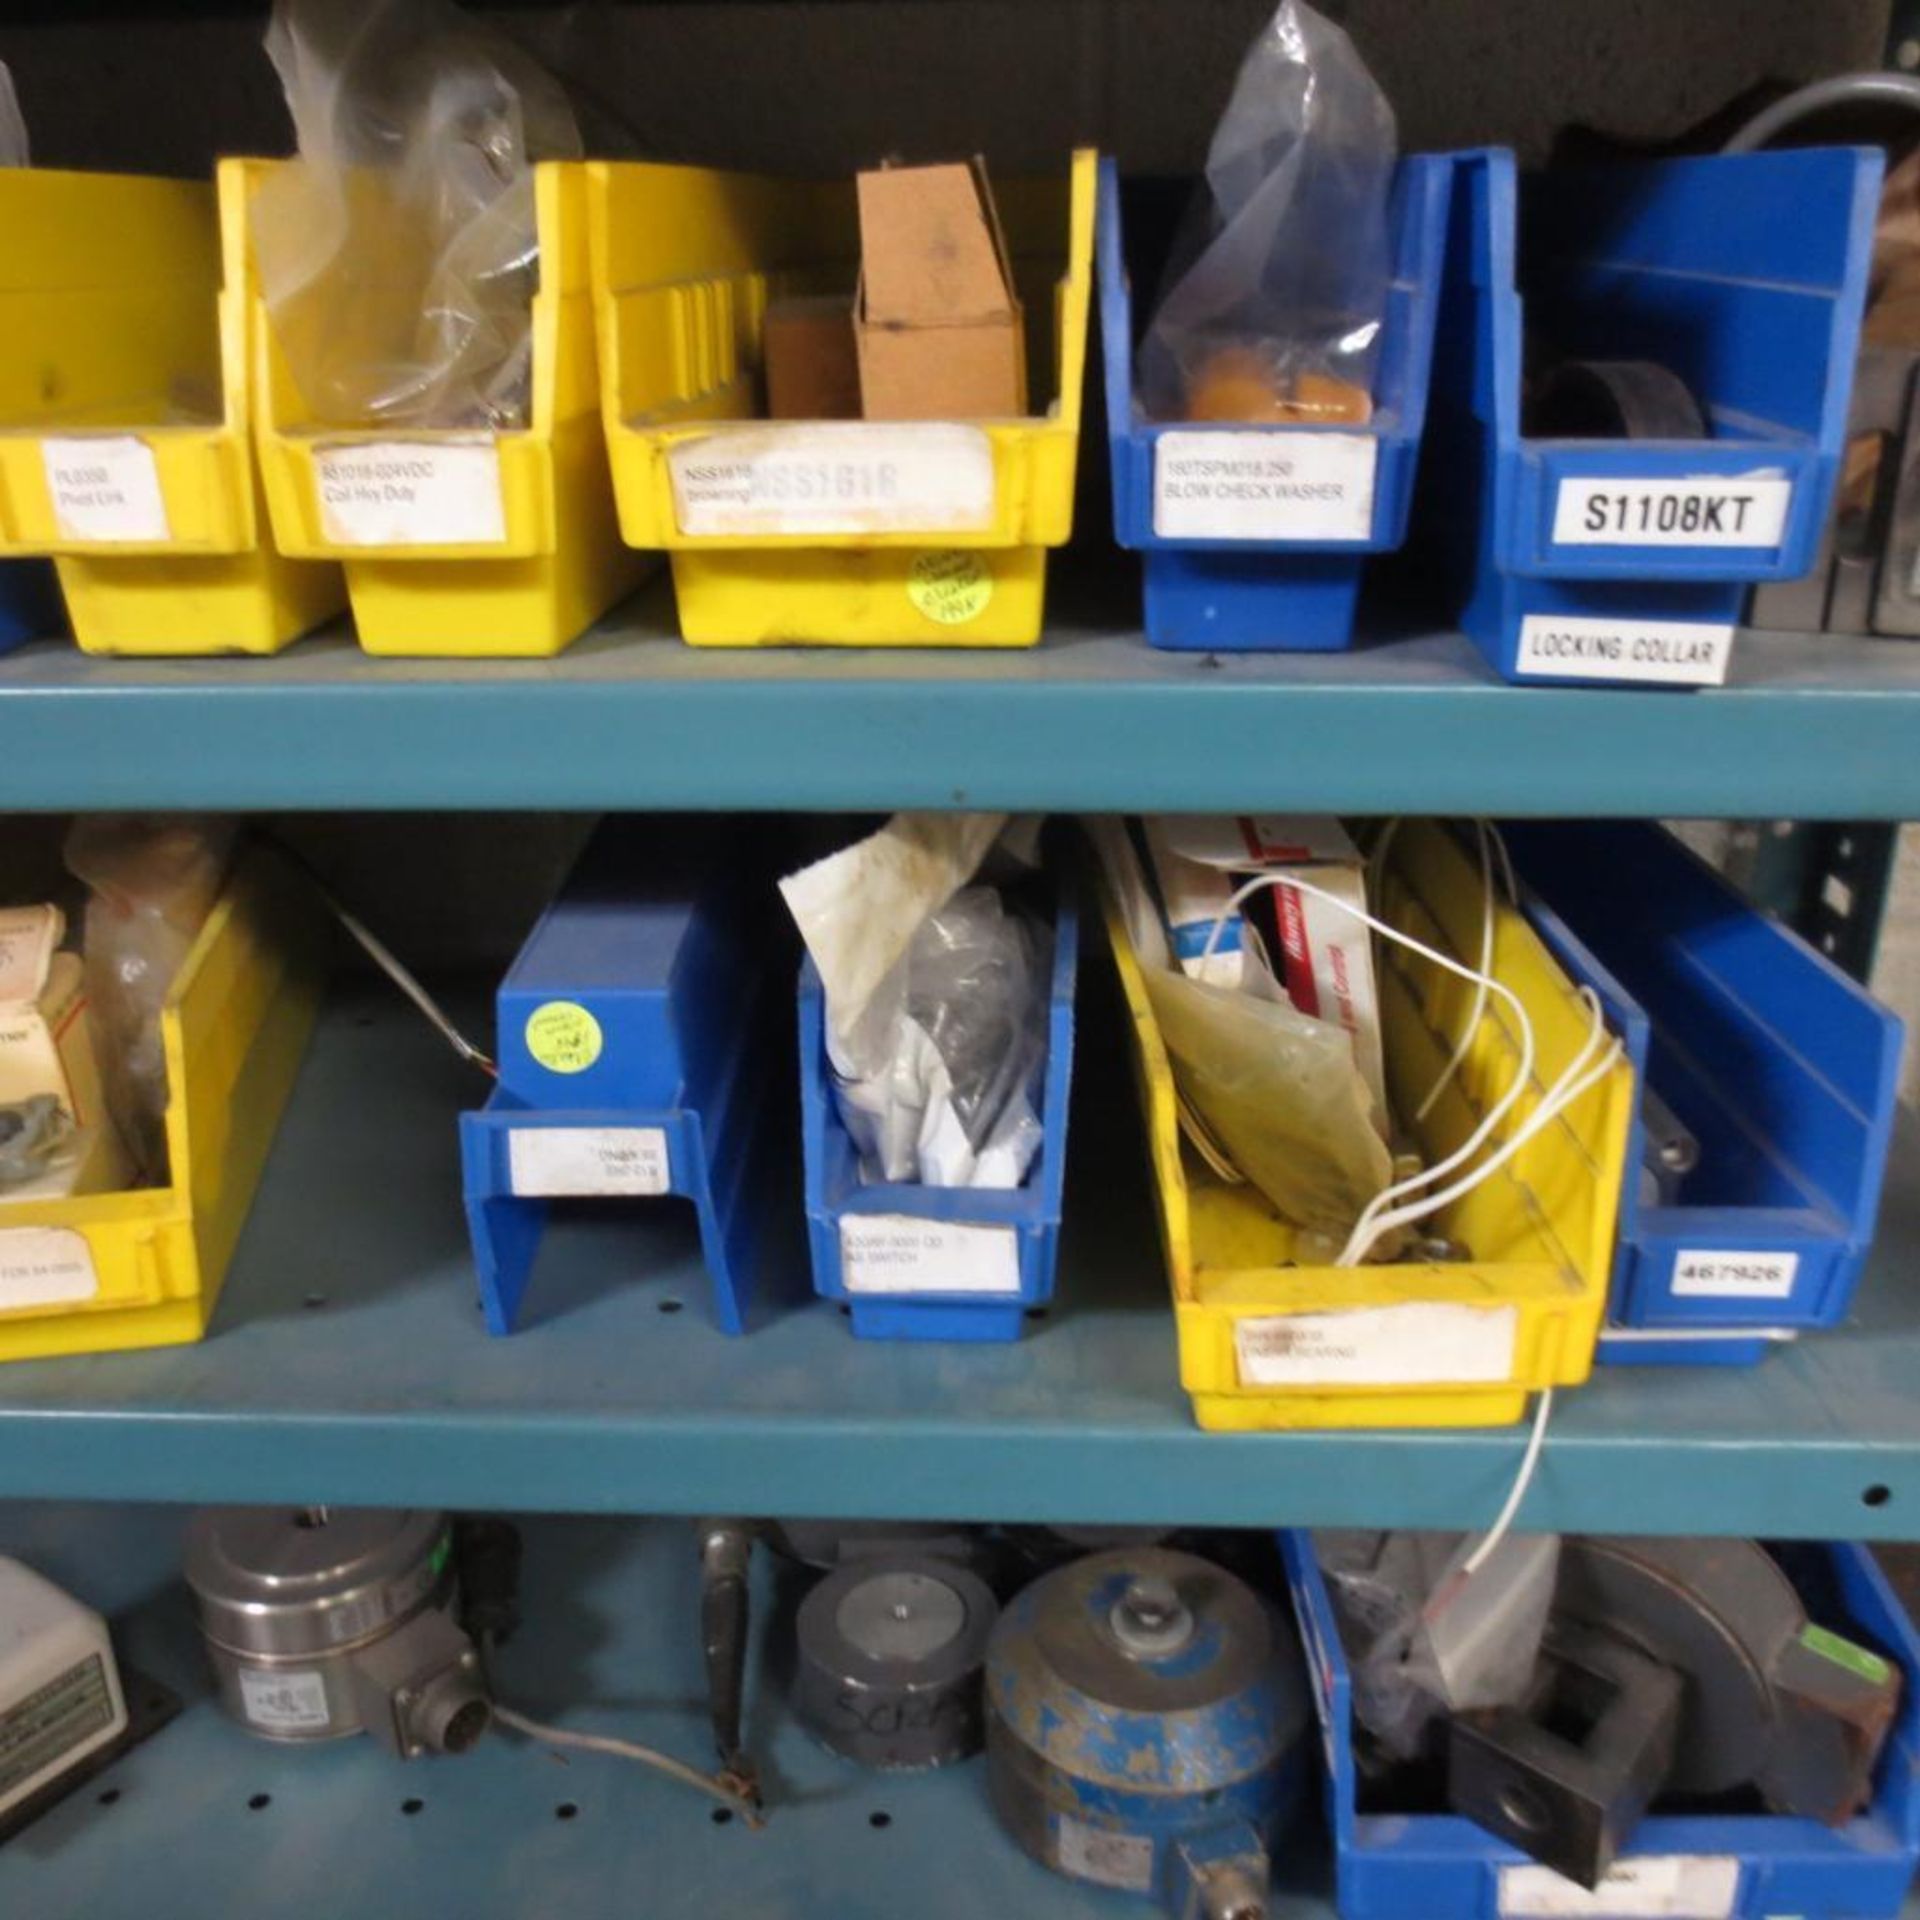 Parts Room Consisting of Gears, Electric Boards, Motors, AB Item, Filters, Motor Starters and Parts - Image 10 of 42